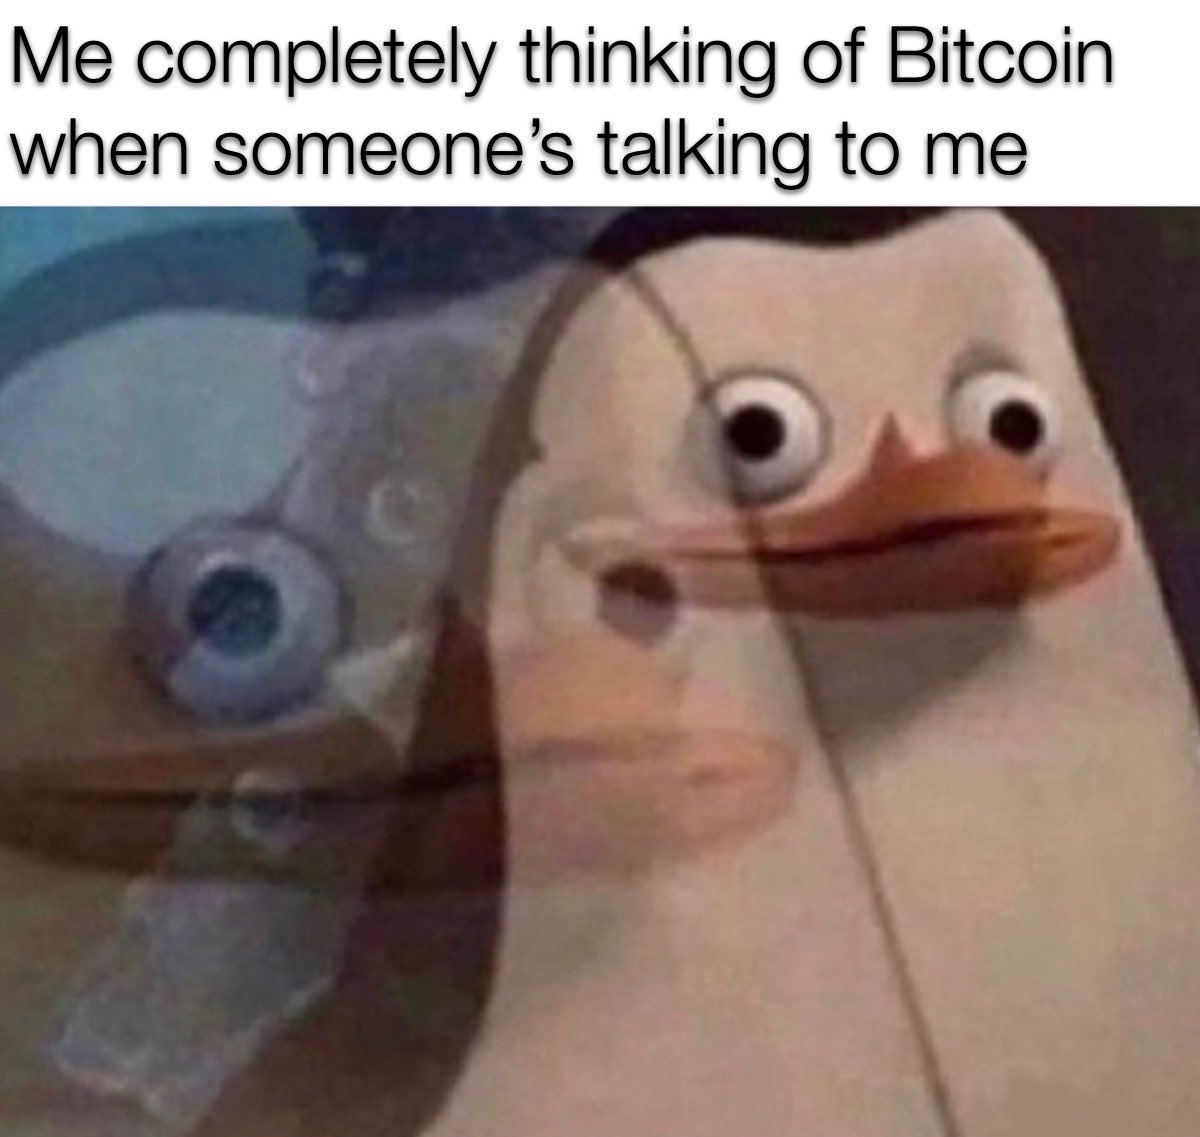 Me completely thinking of Bitcoin
when someone’s talking to m